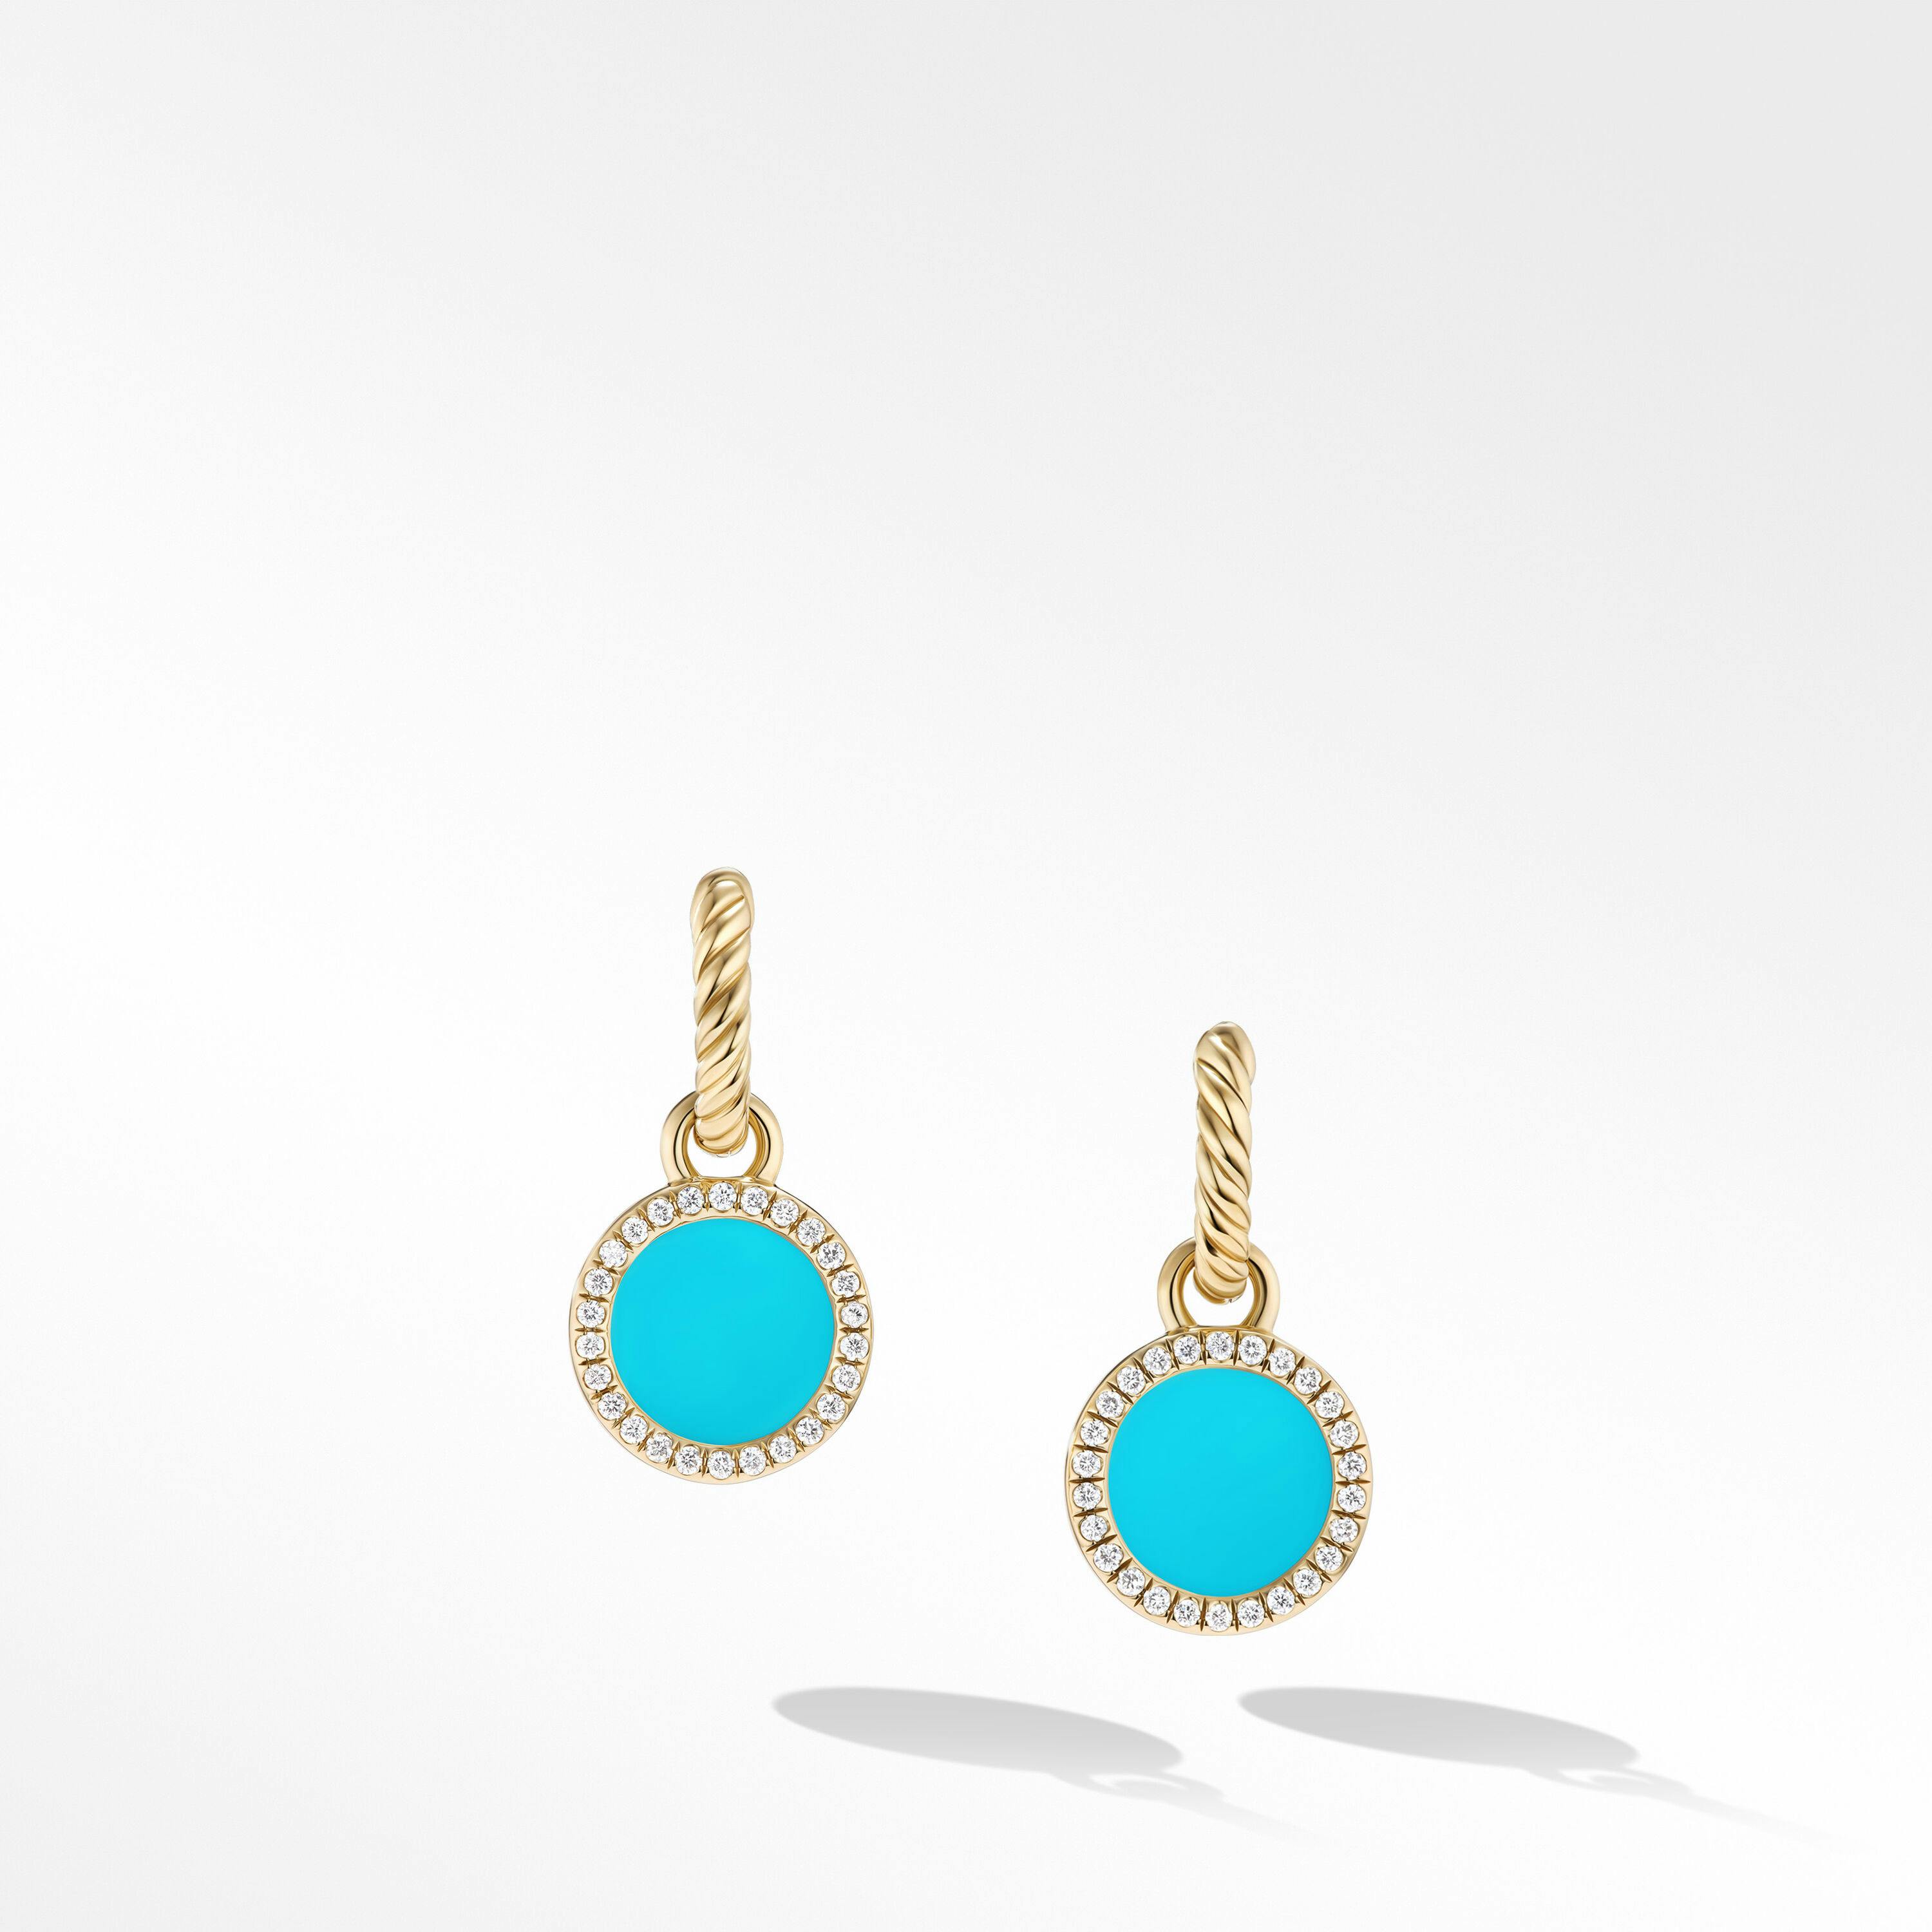 David Yurman Petite DY Elements Drop Earrings with Turquoise and Pave Diamonds